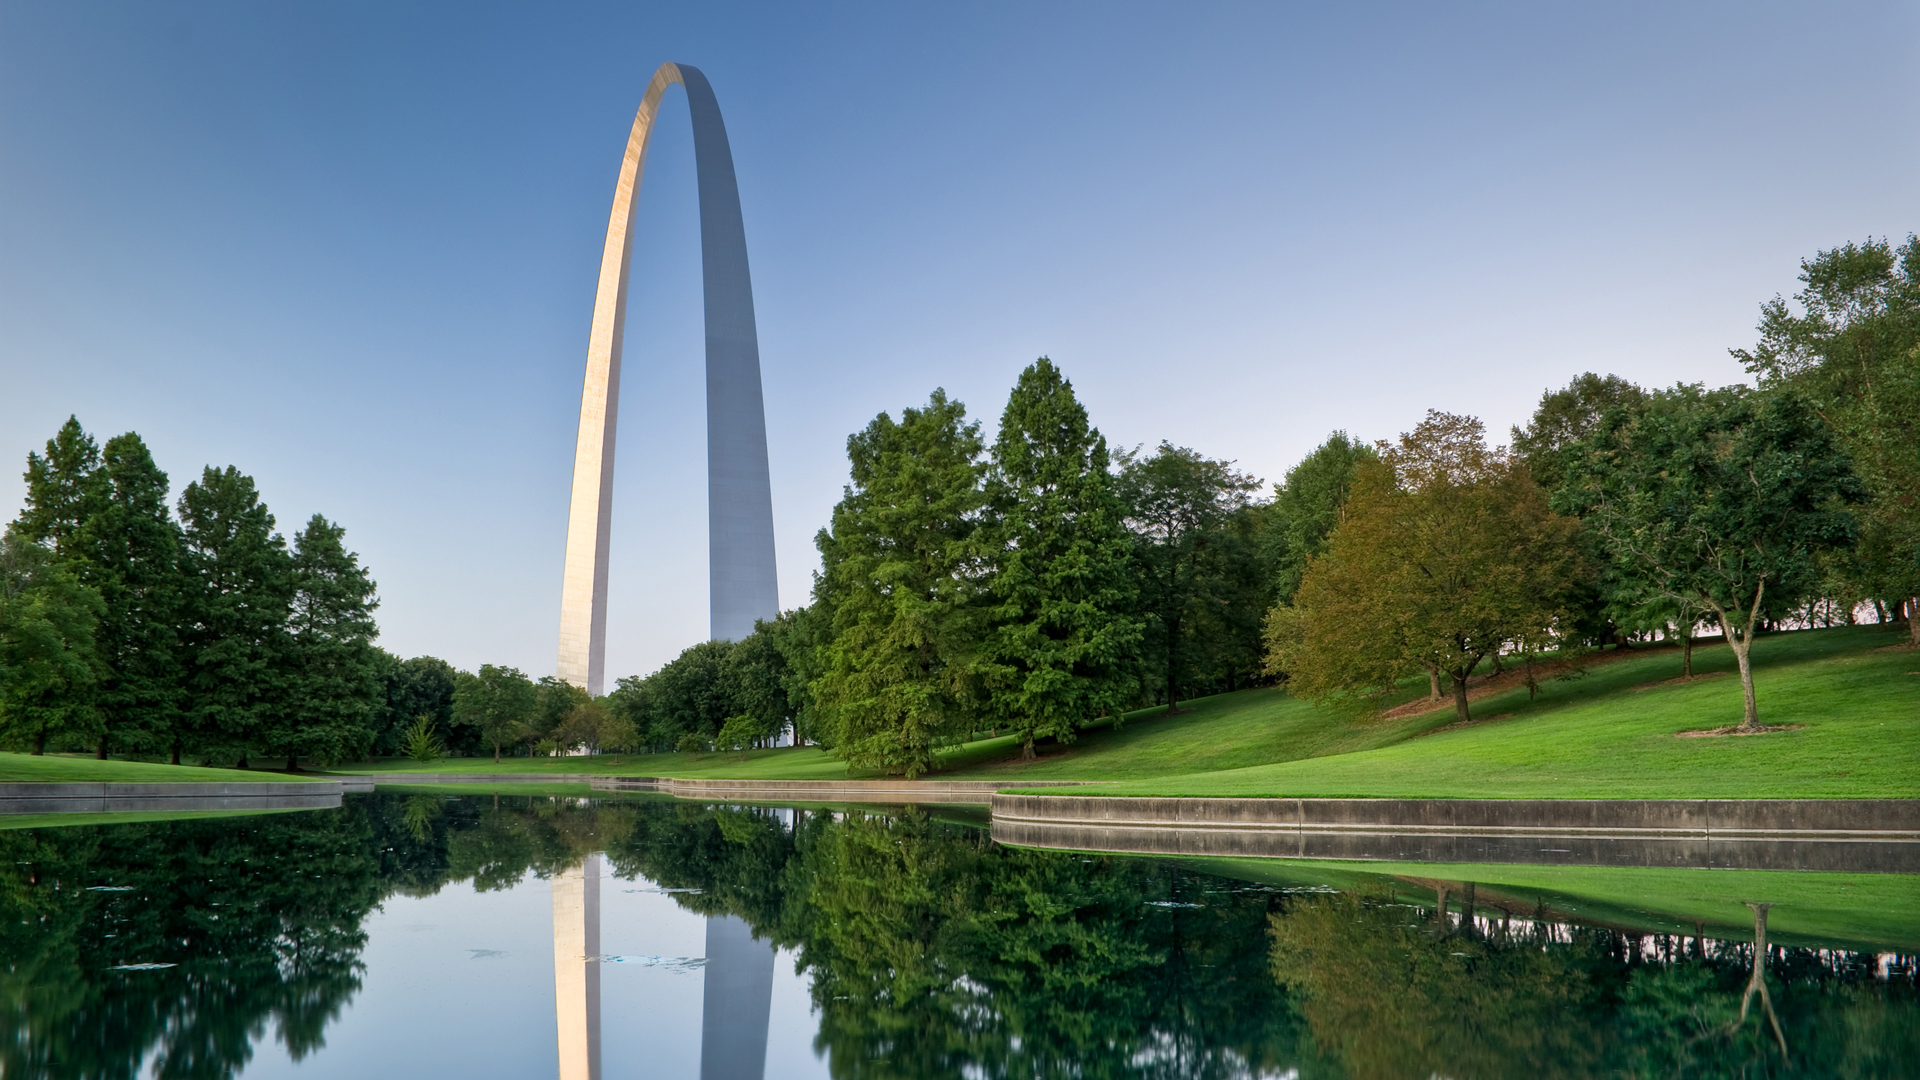 The Gateway Arch is a 630-foot monument in St. Louis, Missouri, United States.